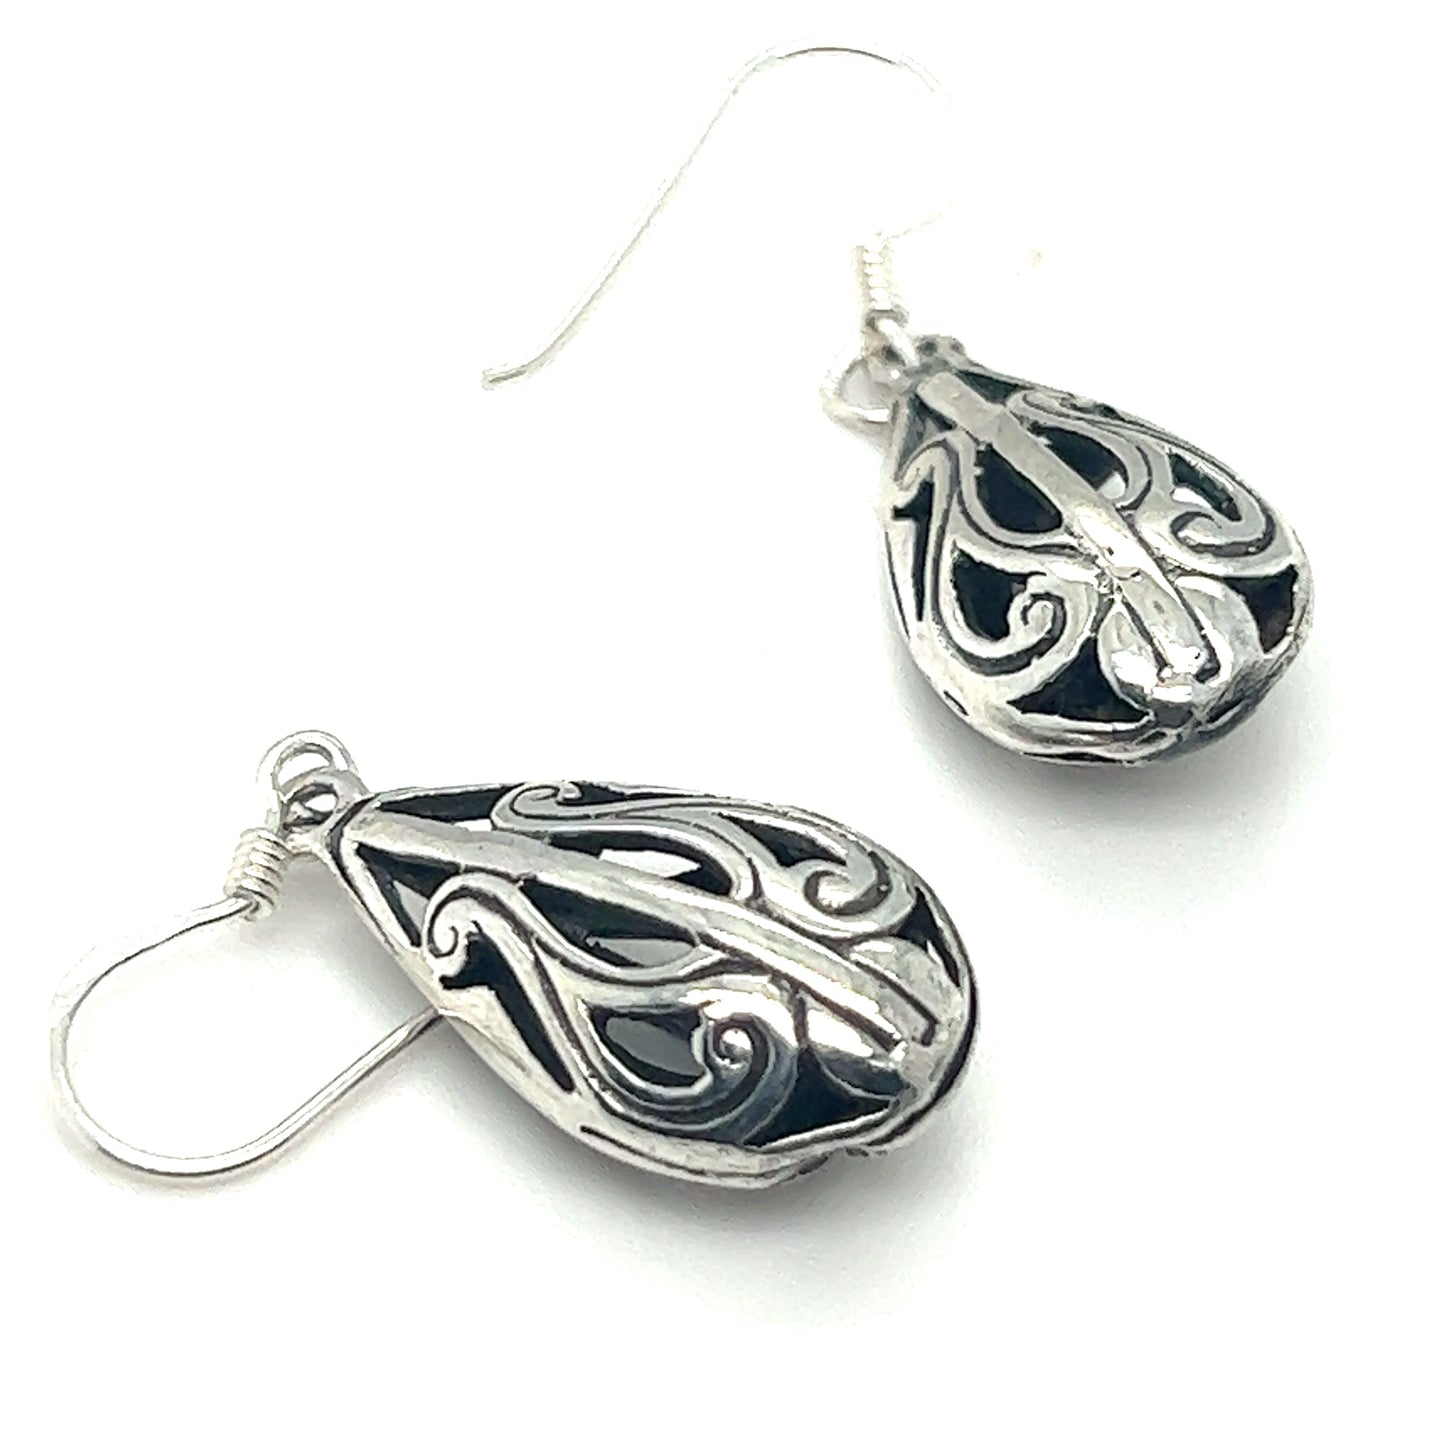 A pair of Super Silver Filigree Teardrop Earrings with an ornate design.